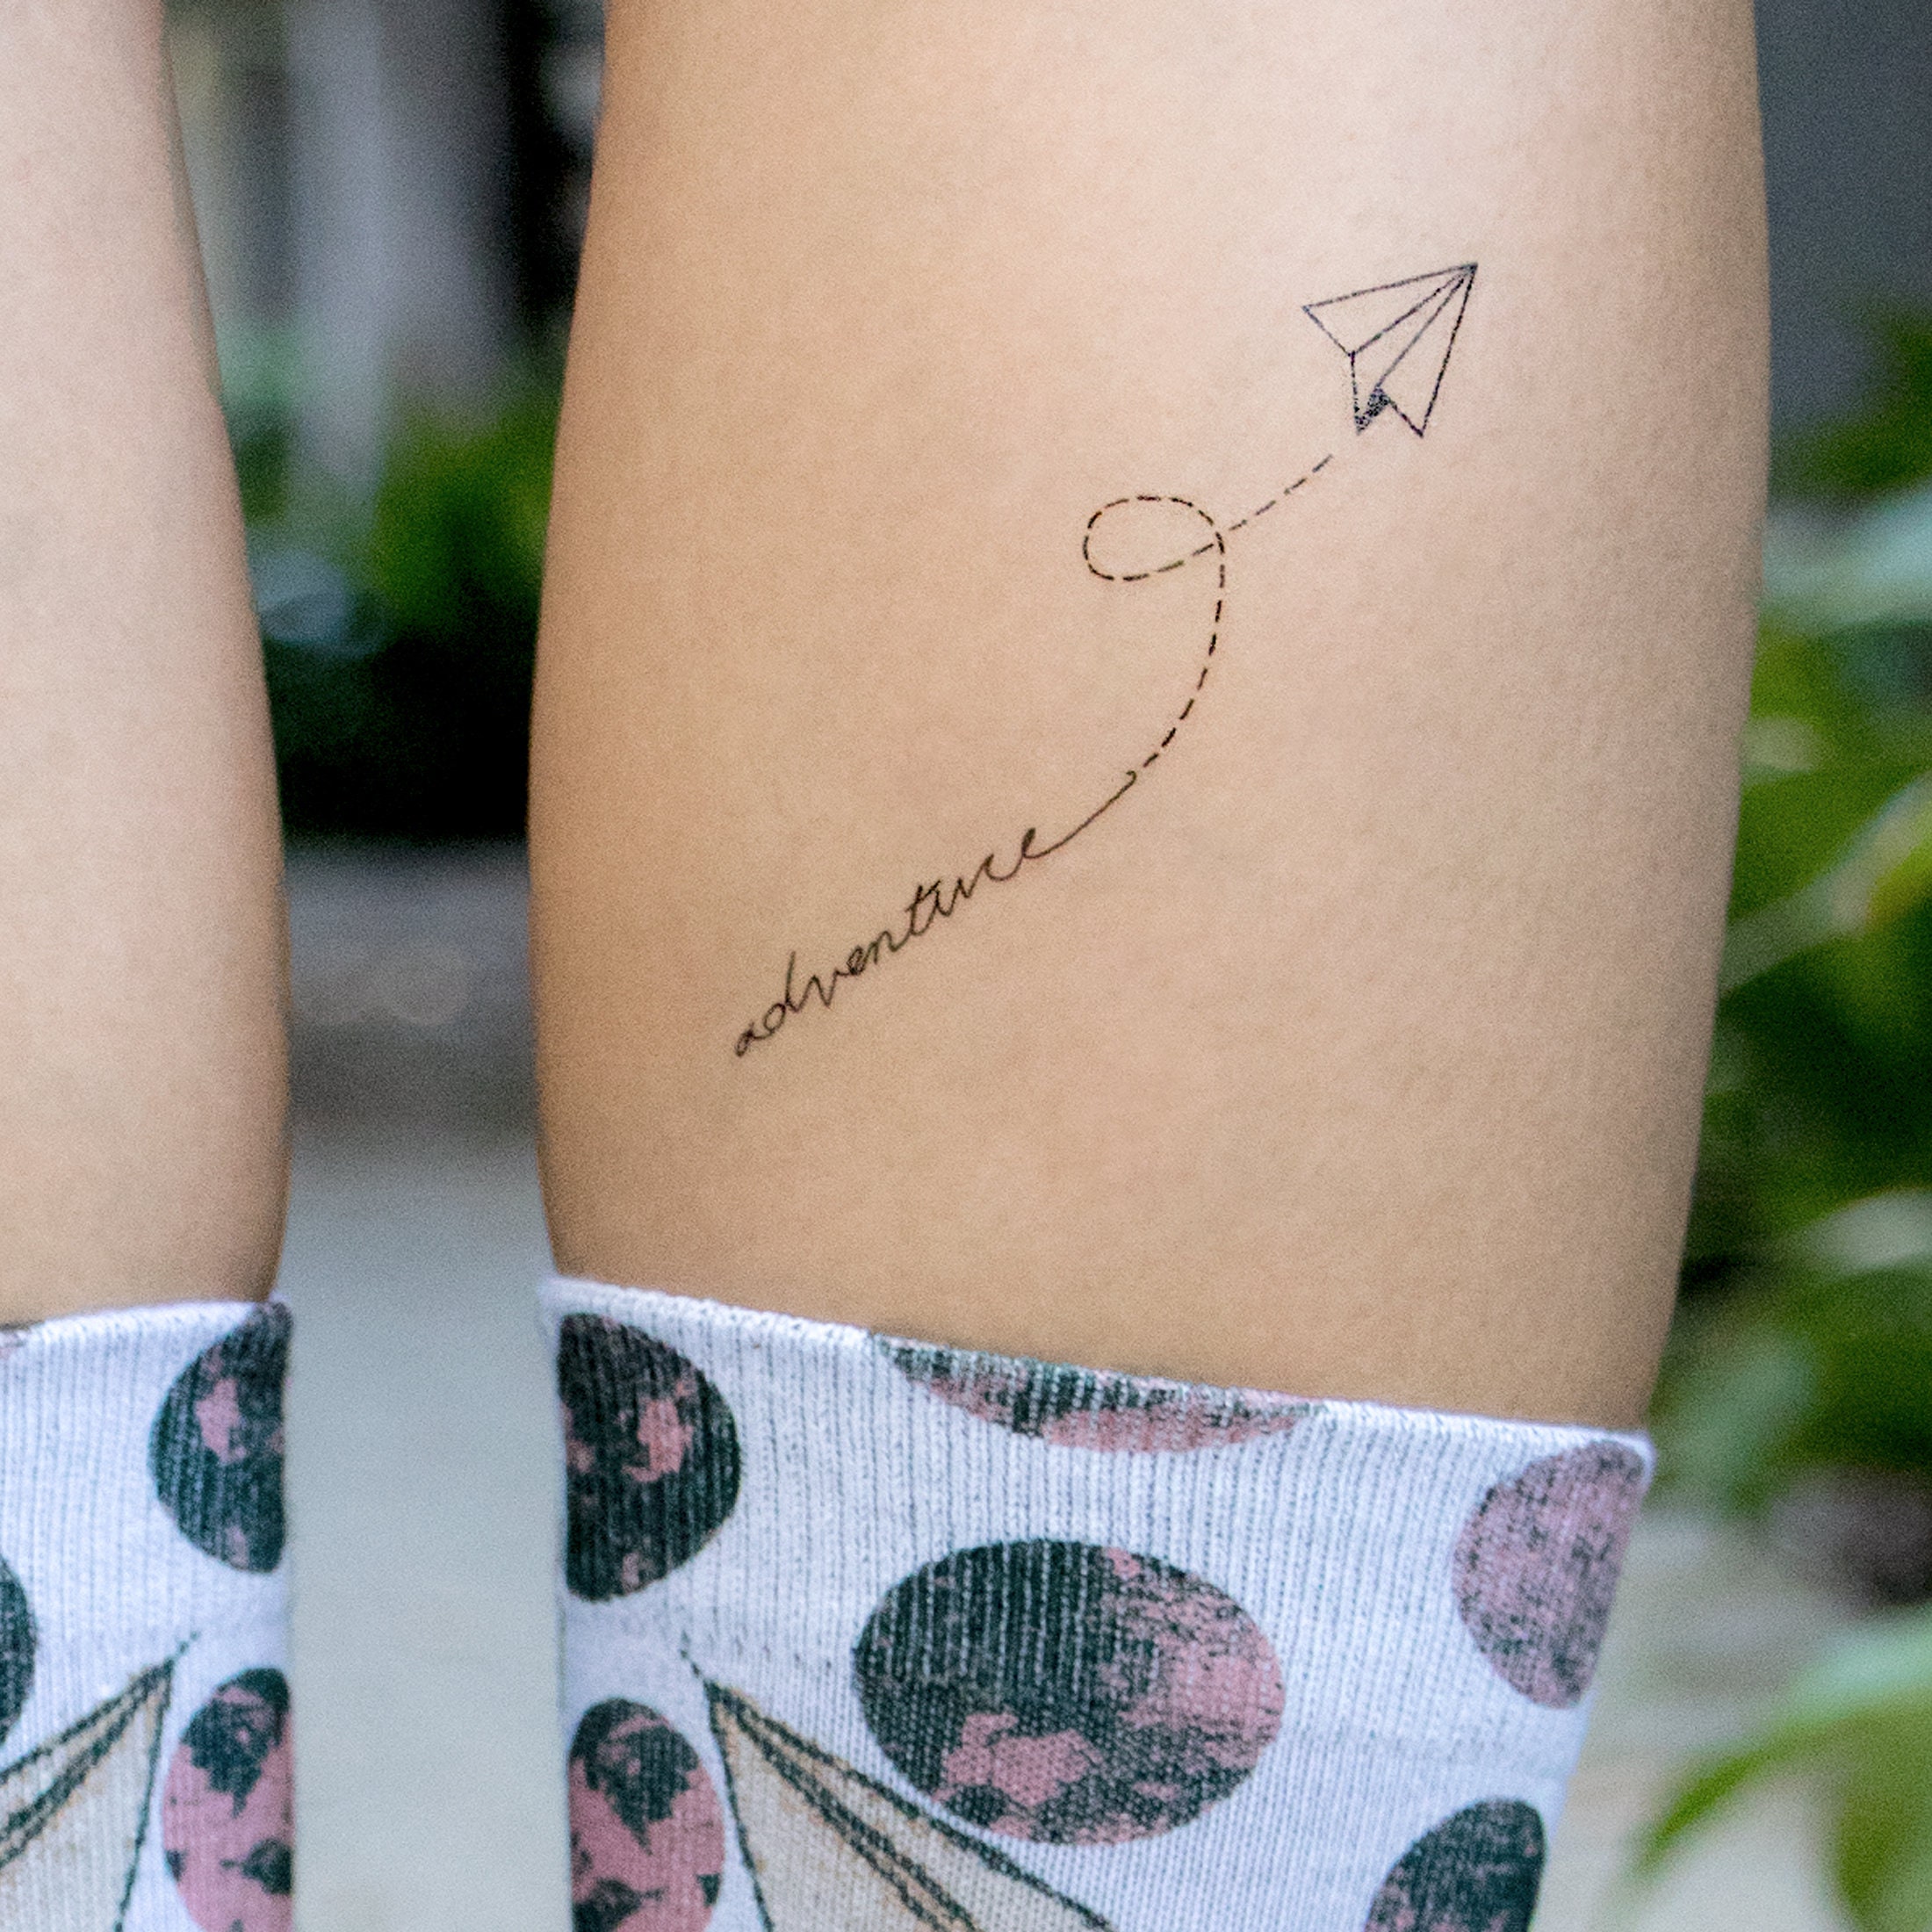 75 travel tattoo ideas that are only for adventure seekers | Good jokes,  Family guy quotes, Weird world